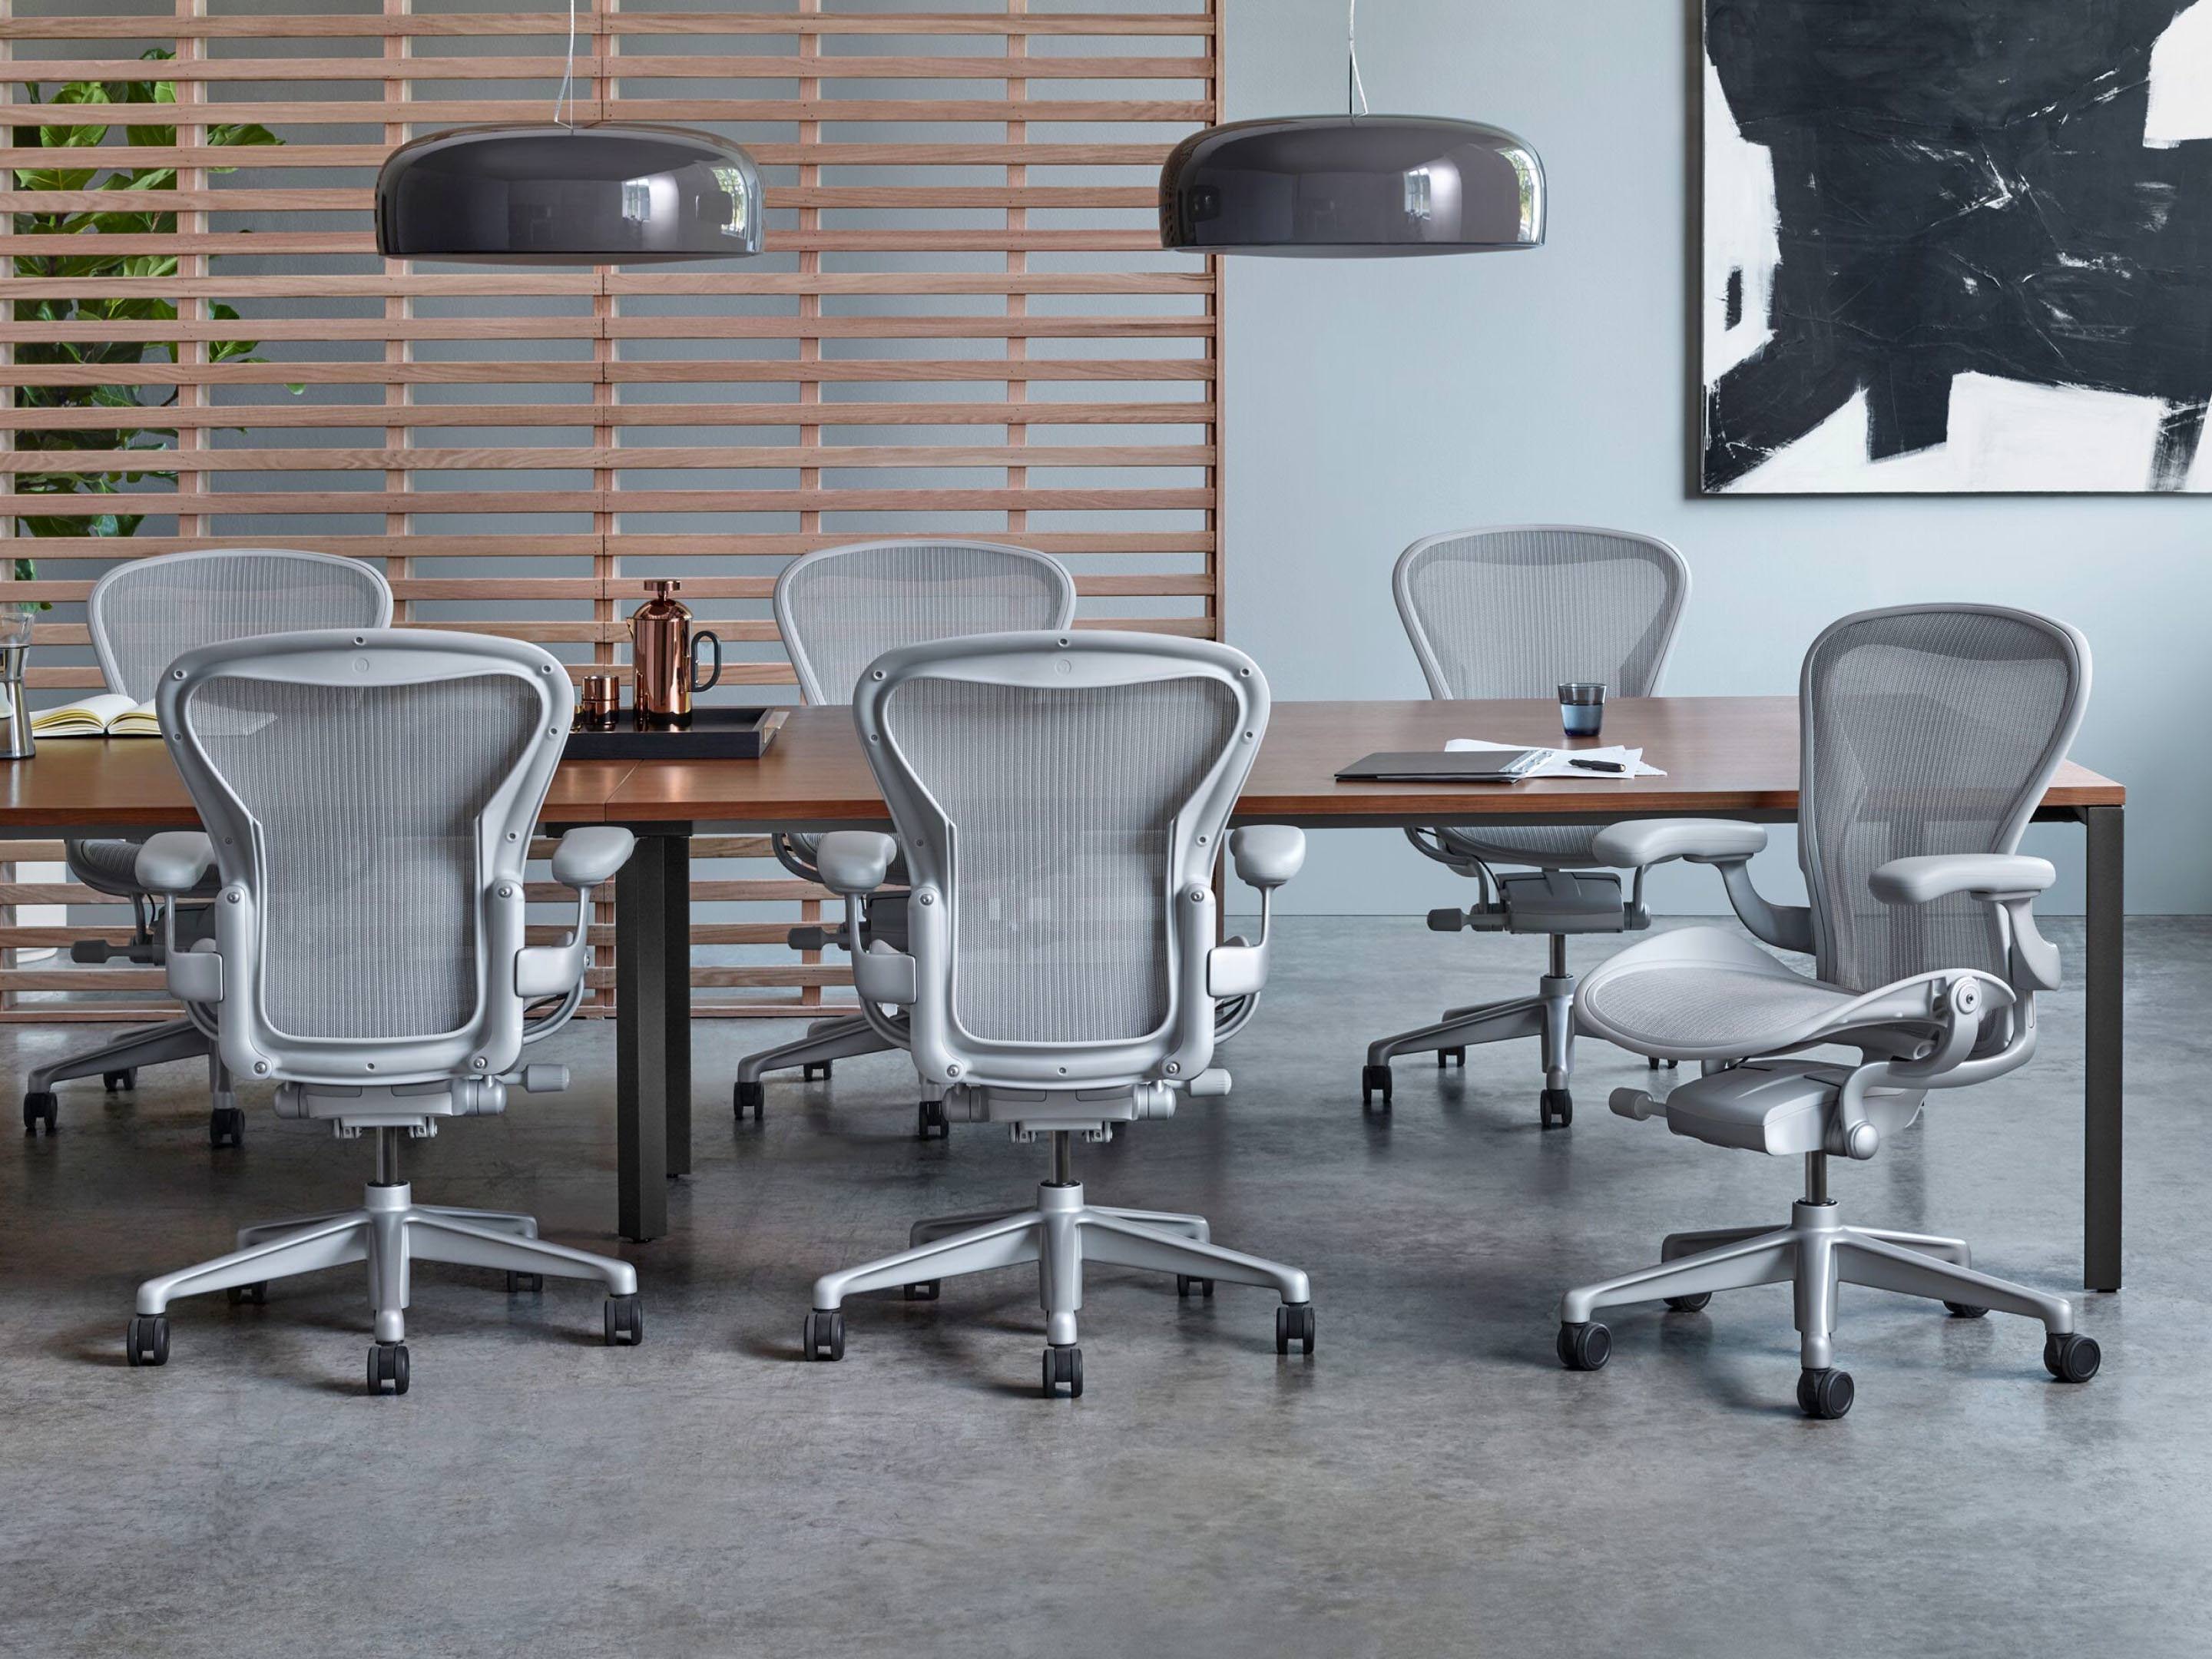 All You Need to Know About the Herman Miller Aeron Chair – Your Guide to Working in Comfort and Style From Home.